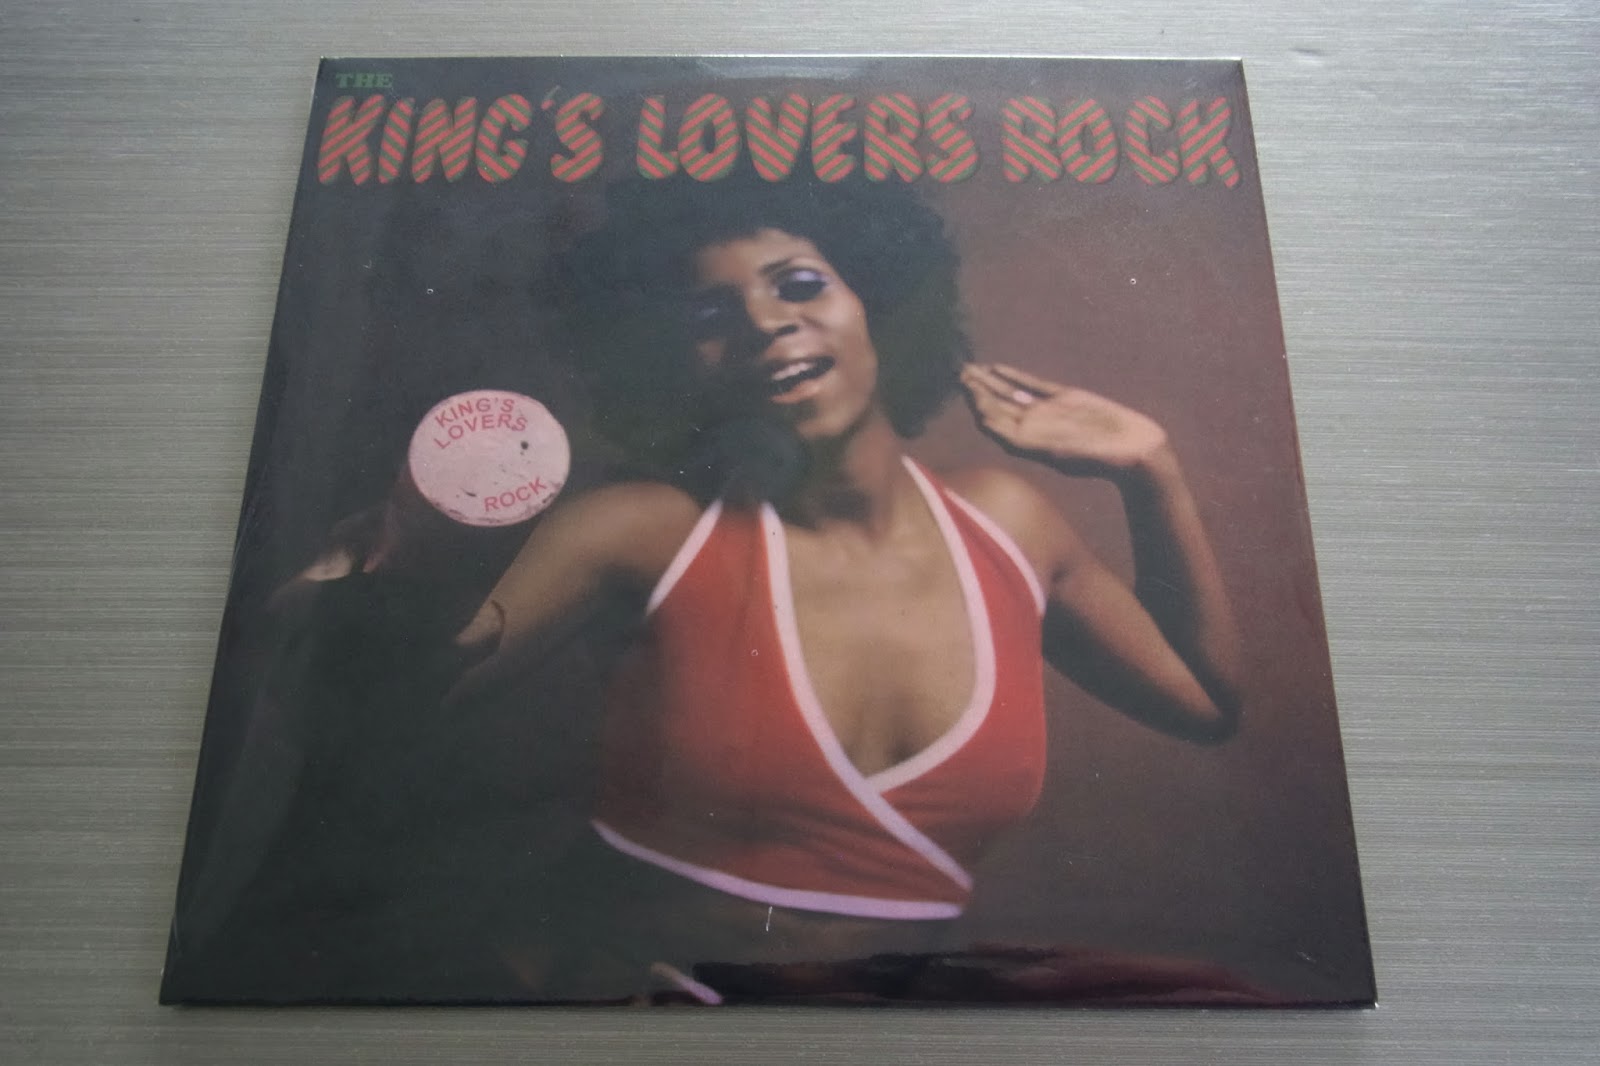 =spinners=: The KING’S LOVERS ROCK -MIX BY DJ MURO-1600 x 1066